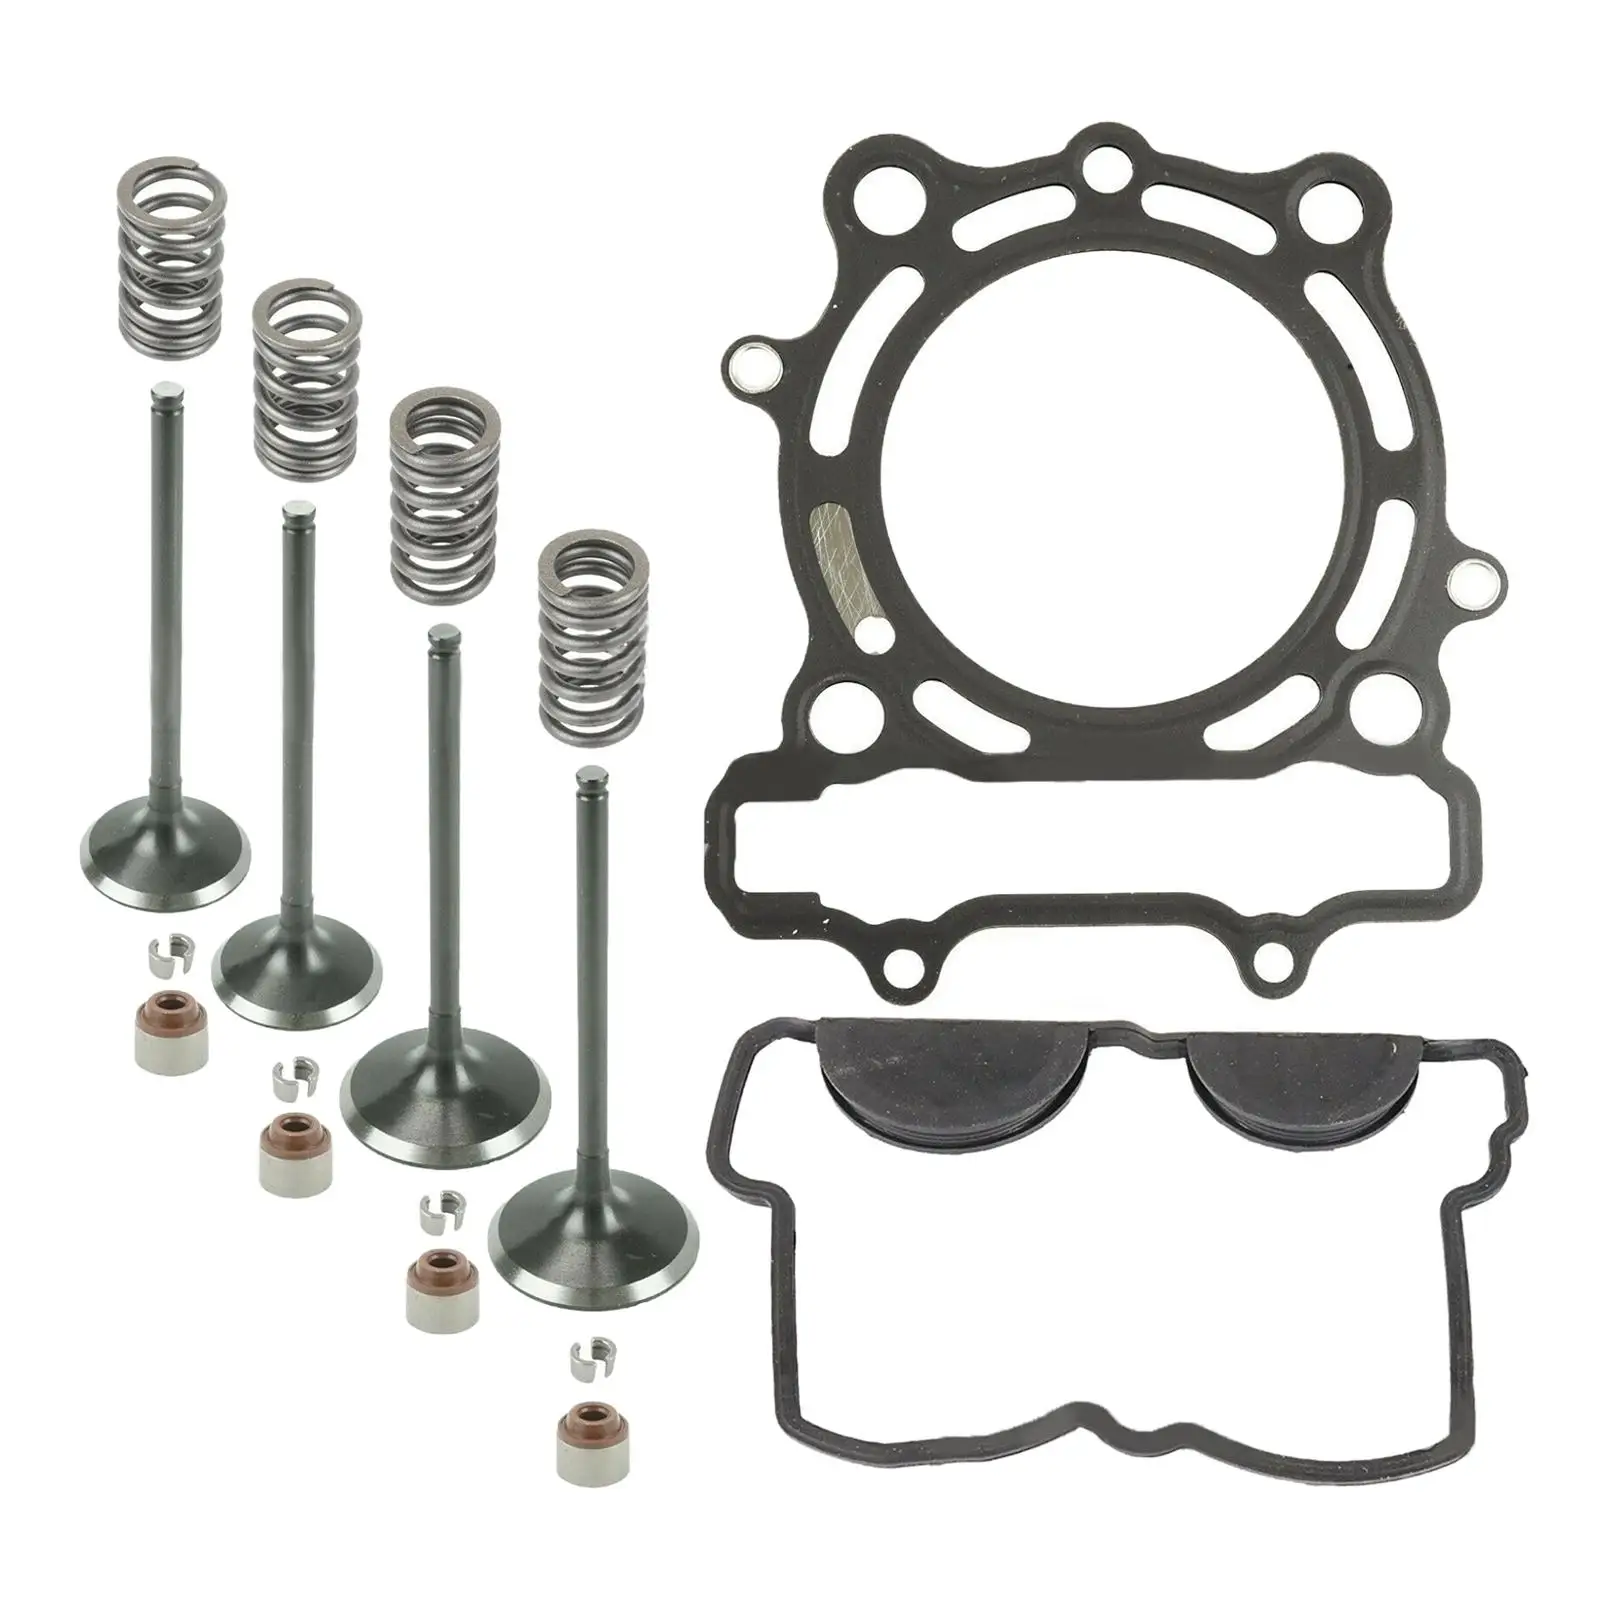 Motorcycle Cylinder Intake Exhaust Gasket Valve Kit Accessories Engine Parts Fit for Kawasaki KX250F Kxf250 KX 250F 09-16